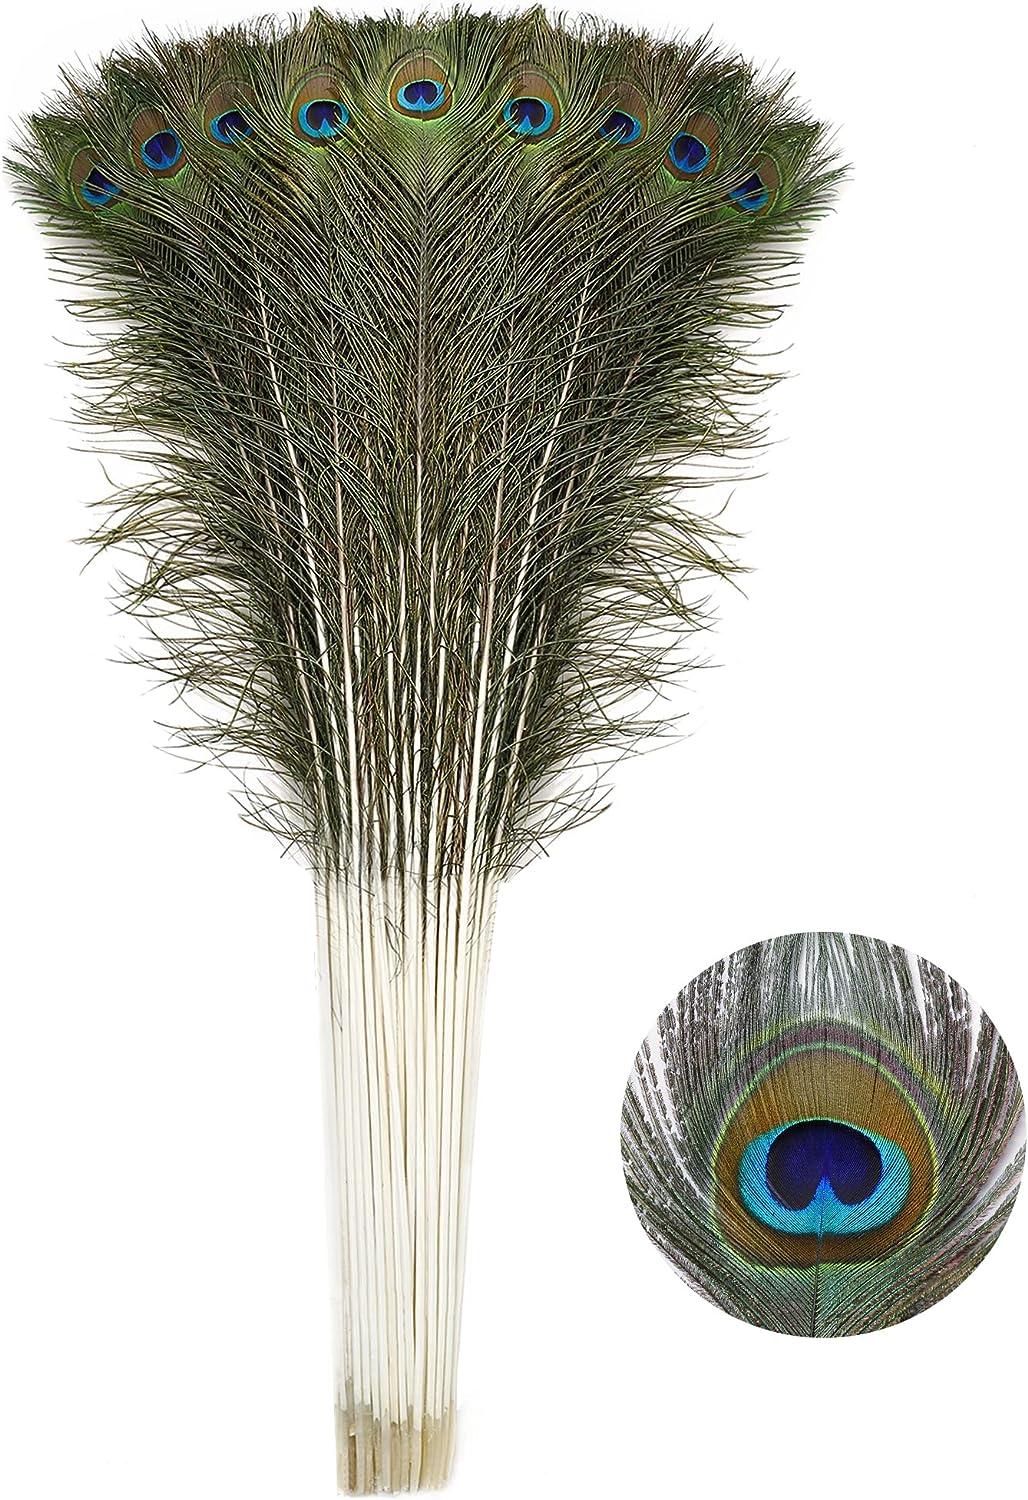 Soarer Long Peacock Feathers Bulk- 25pcs 32-35 inches Feathers for Vase  Holiday Decoration and DIY Crafts